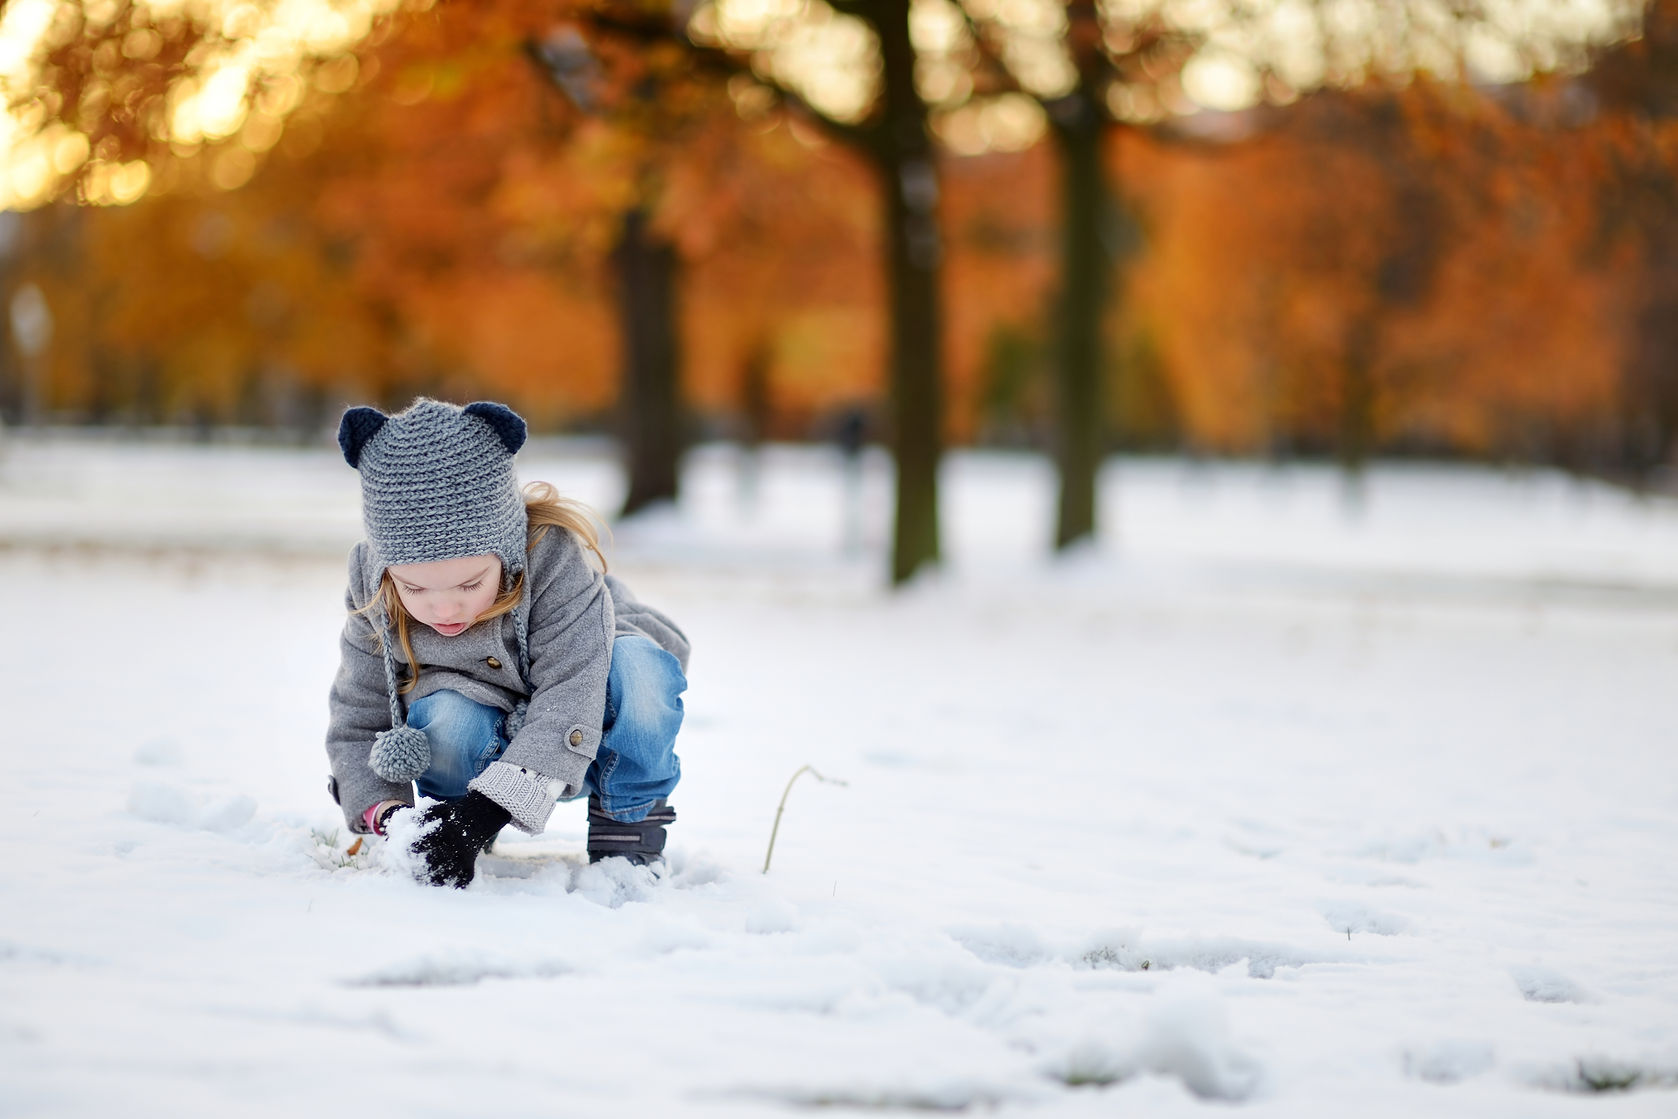 Snow-Themed Crafts & Activities for Kids - FamilyEducation